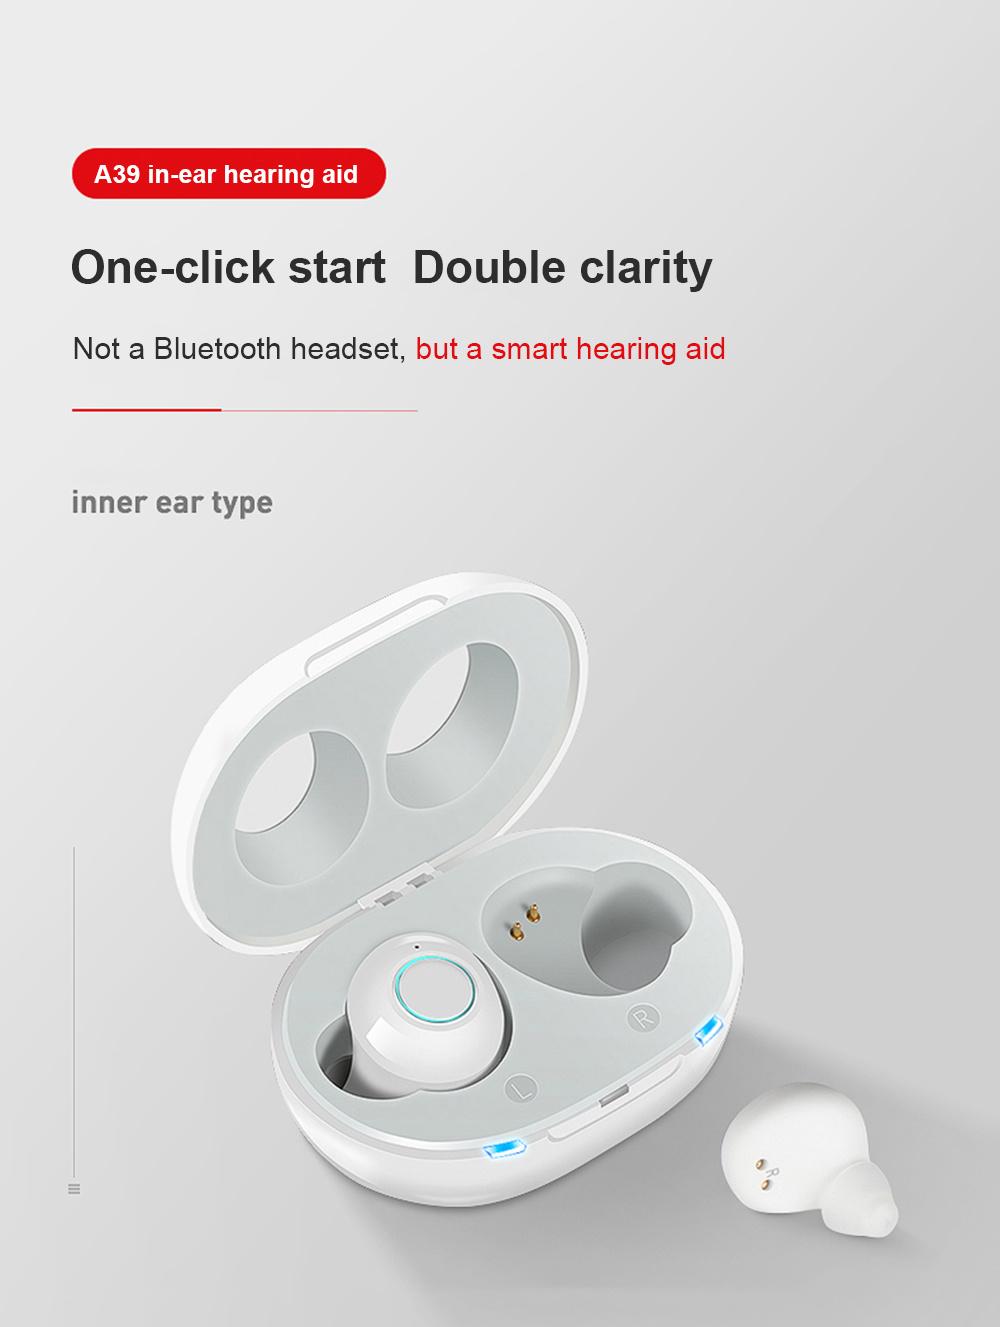 Reachargeble Aids Programmable Sound Emplifie Hearing Aid Price